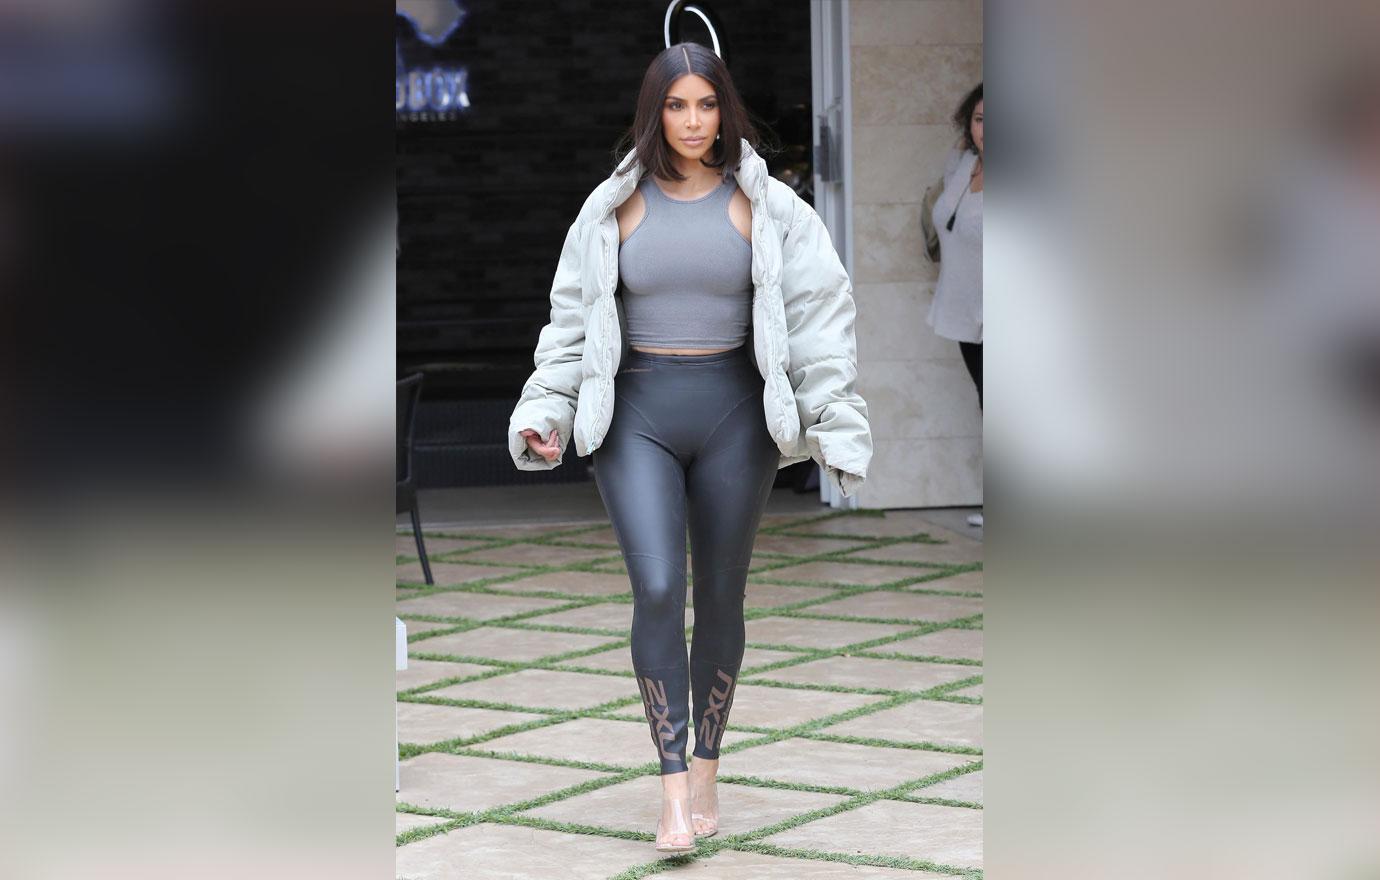 Kardashians In Skintight Leggings: Photos Of The Famous Sisters In